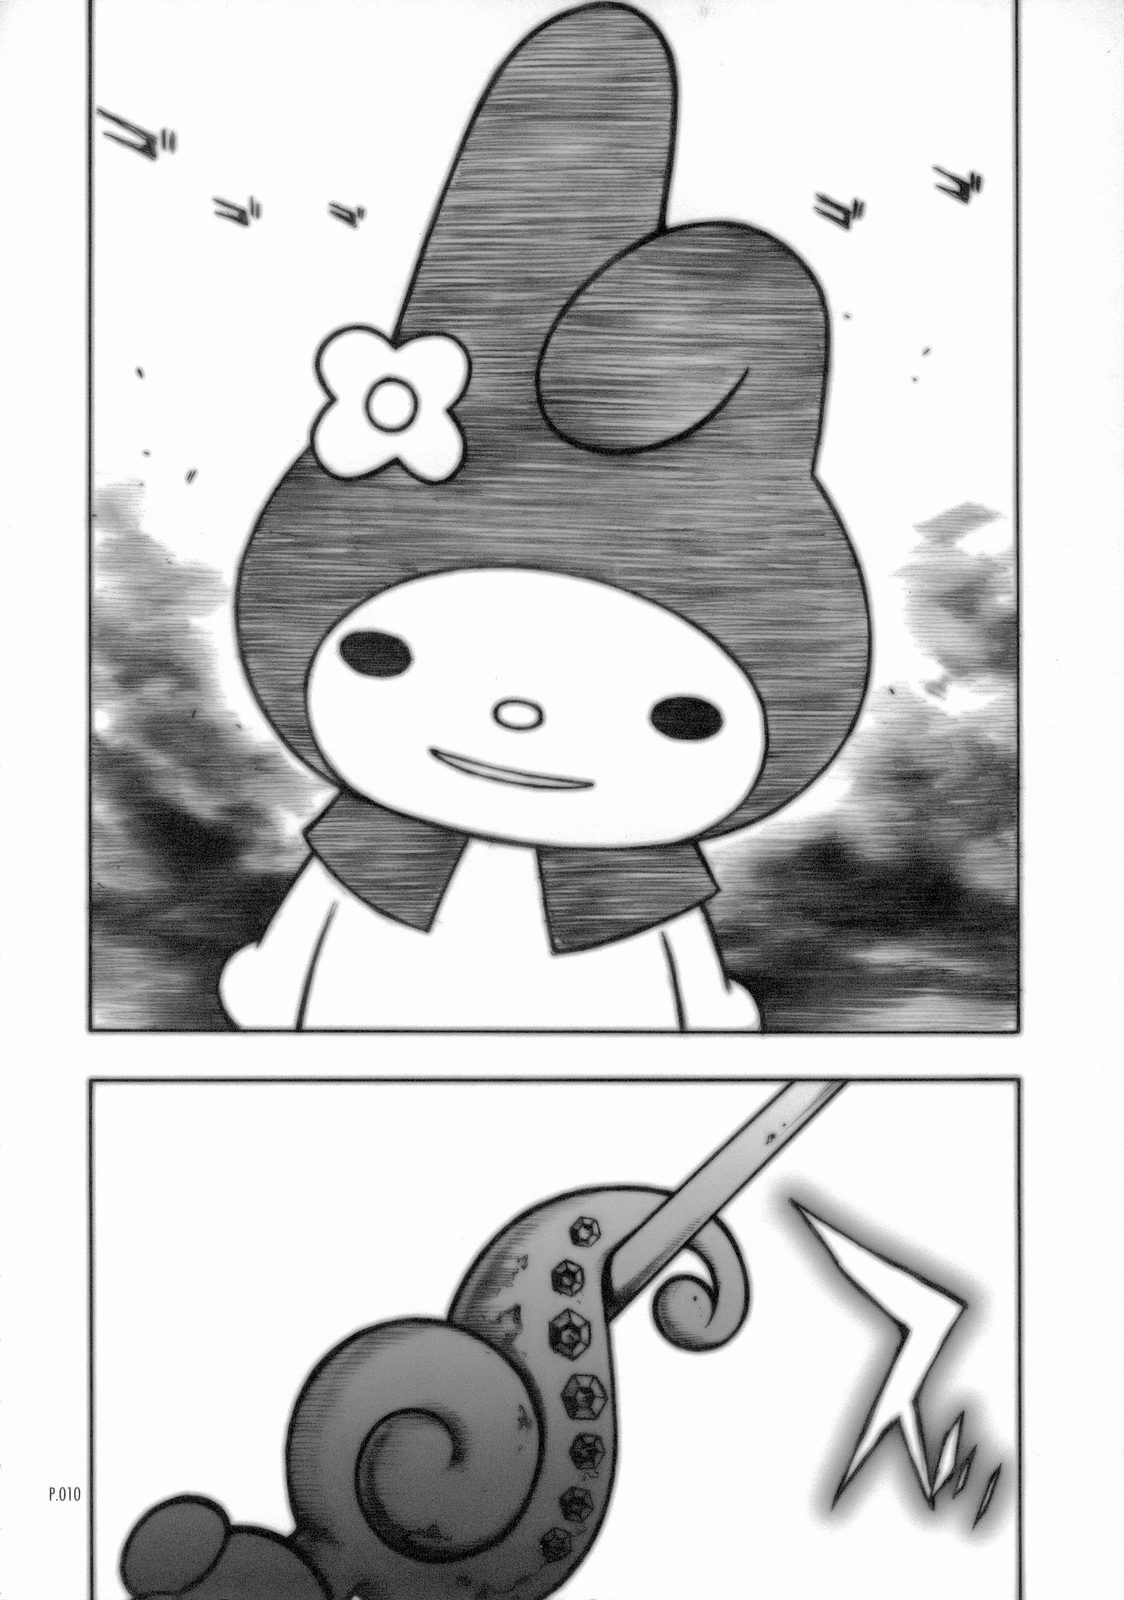 [Piggstar (Nagoya Shachihachi)] Absolute Melody (Onegai My Melody) page 9 full